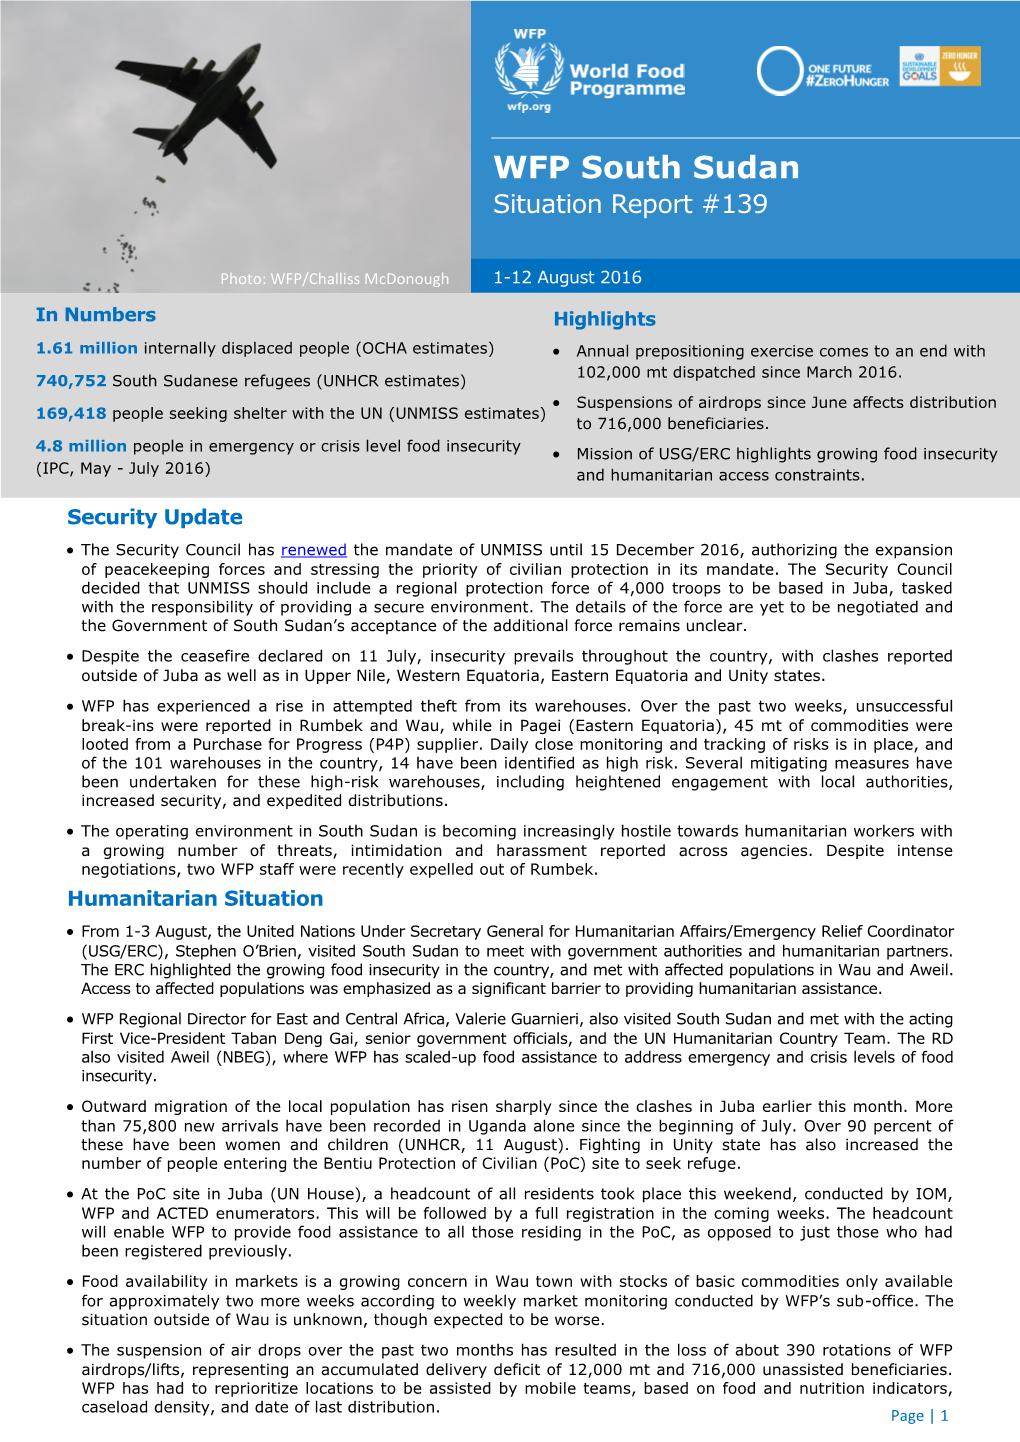 WFP South Sudan Situation Report #139